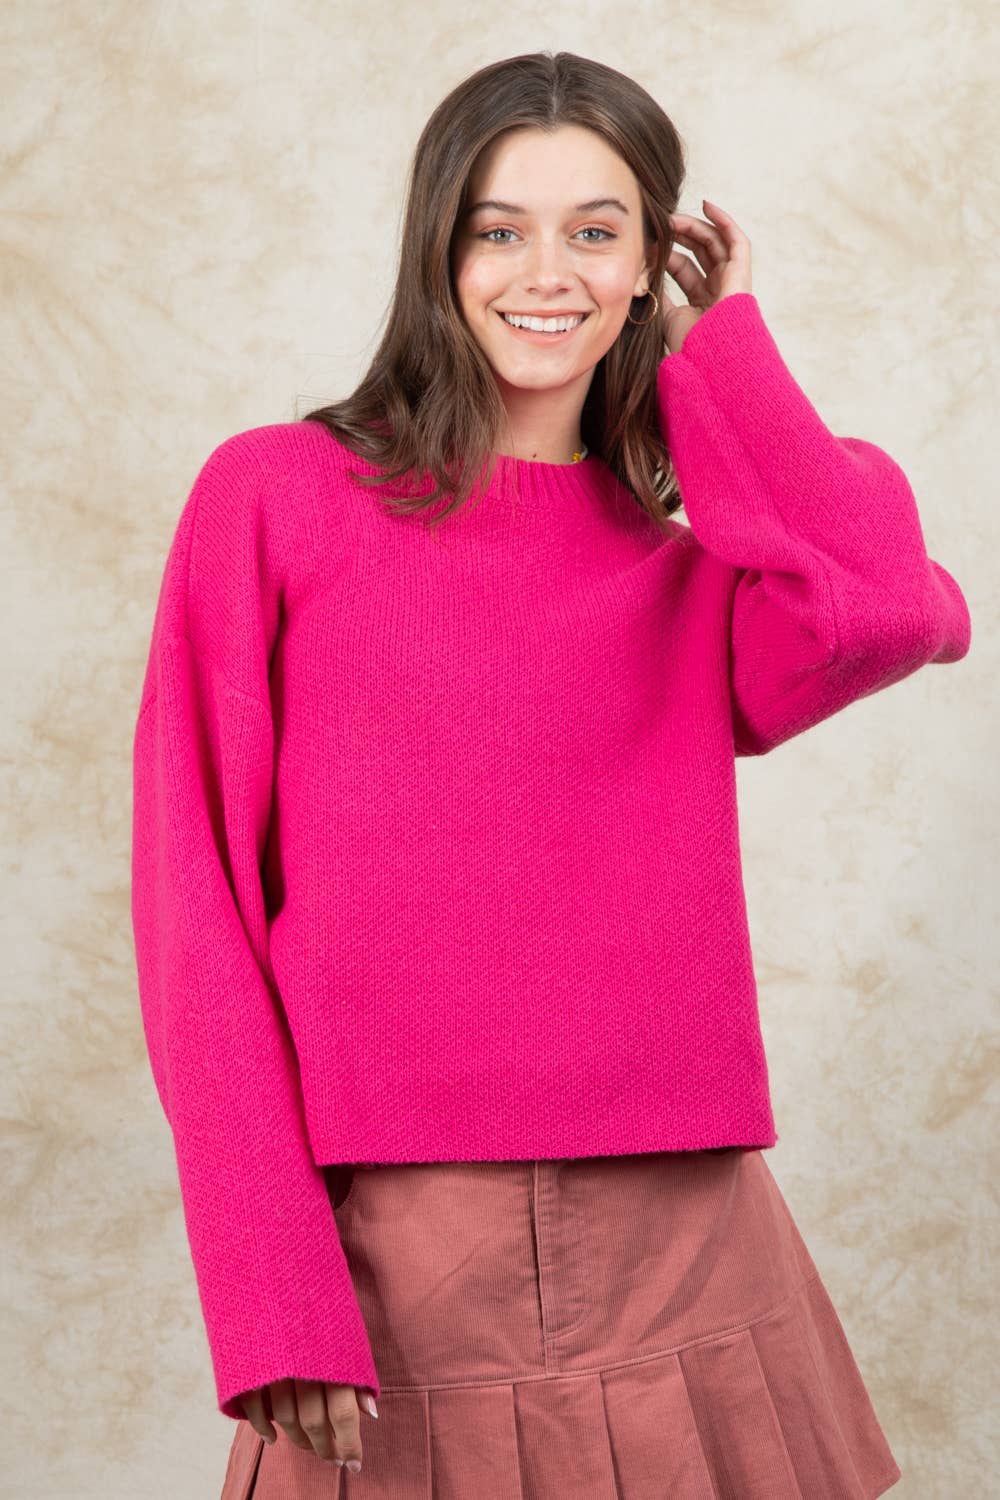 Hot Pink Oversized Sweater Top